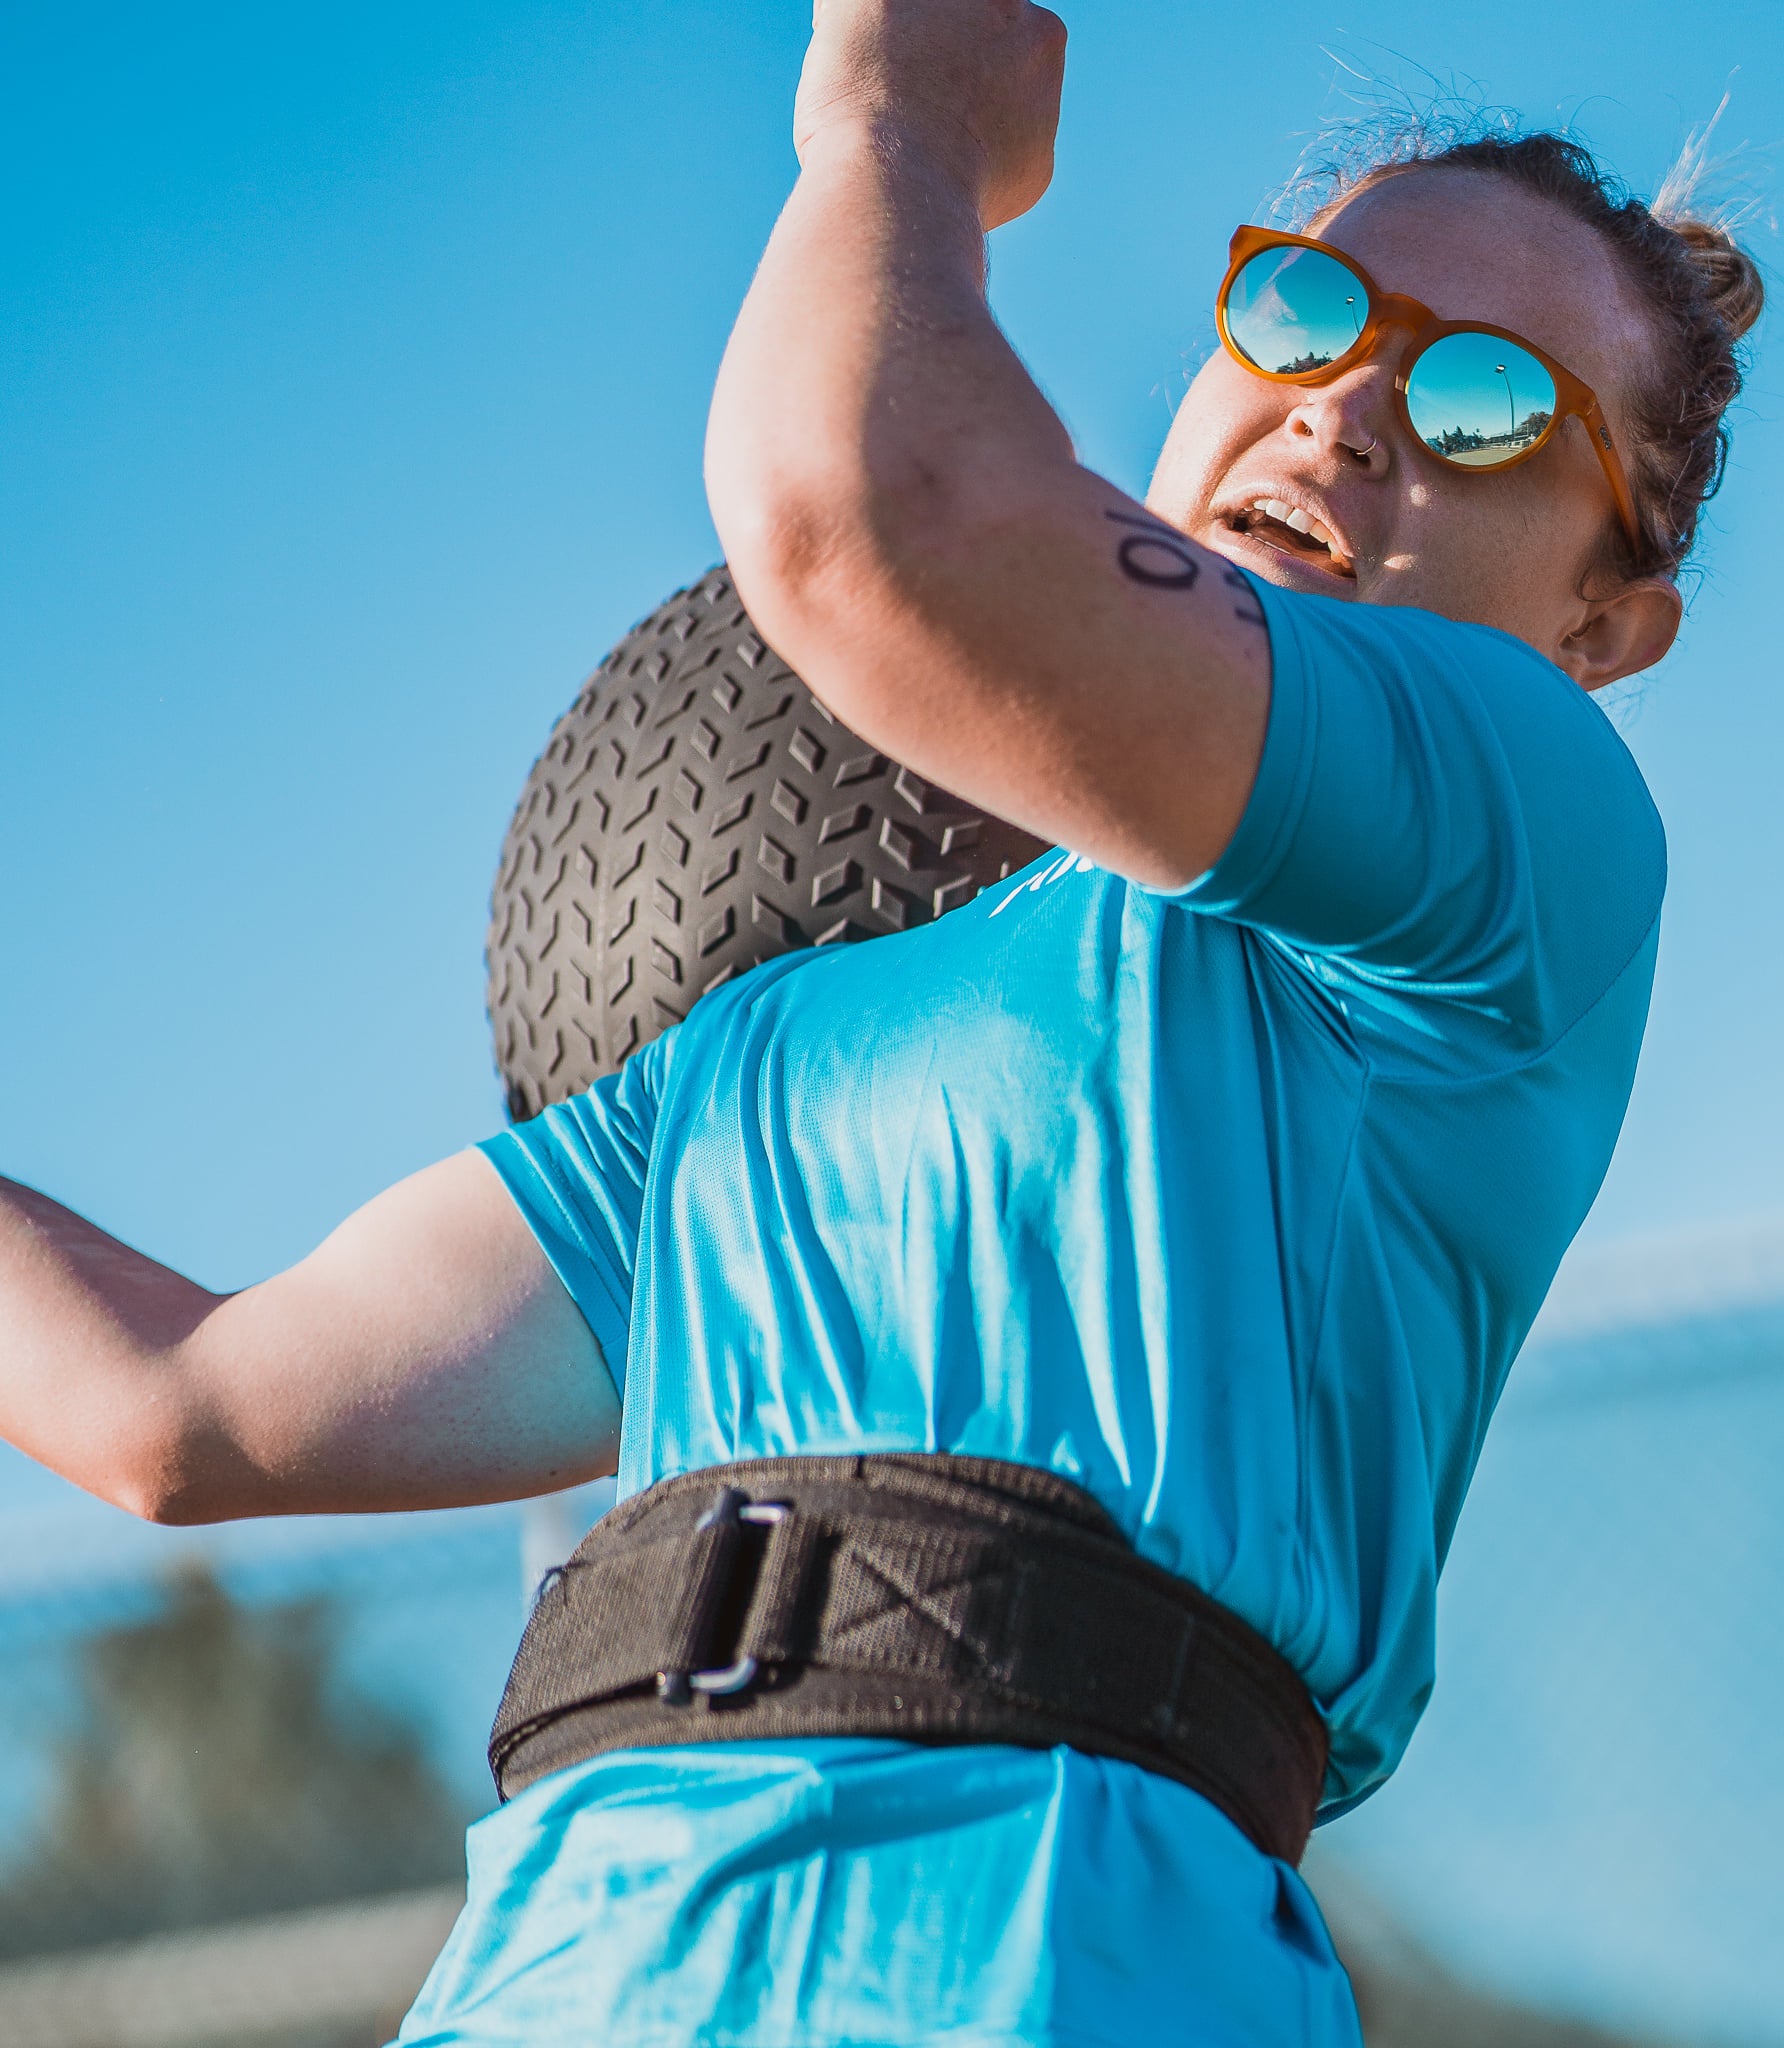 Female Cross Fit Athlete throwing ball over shoulder